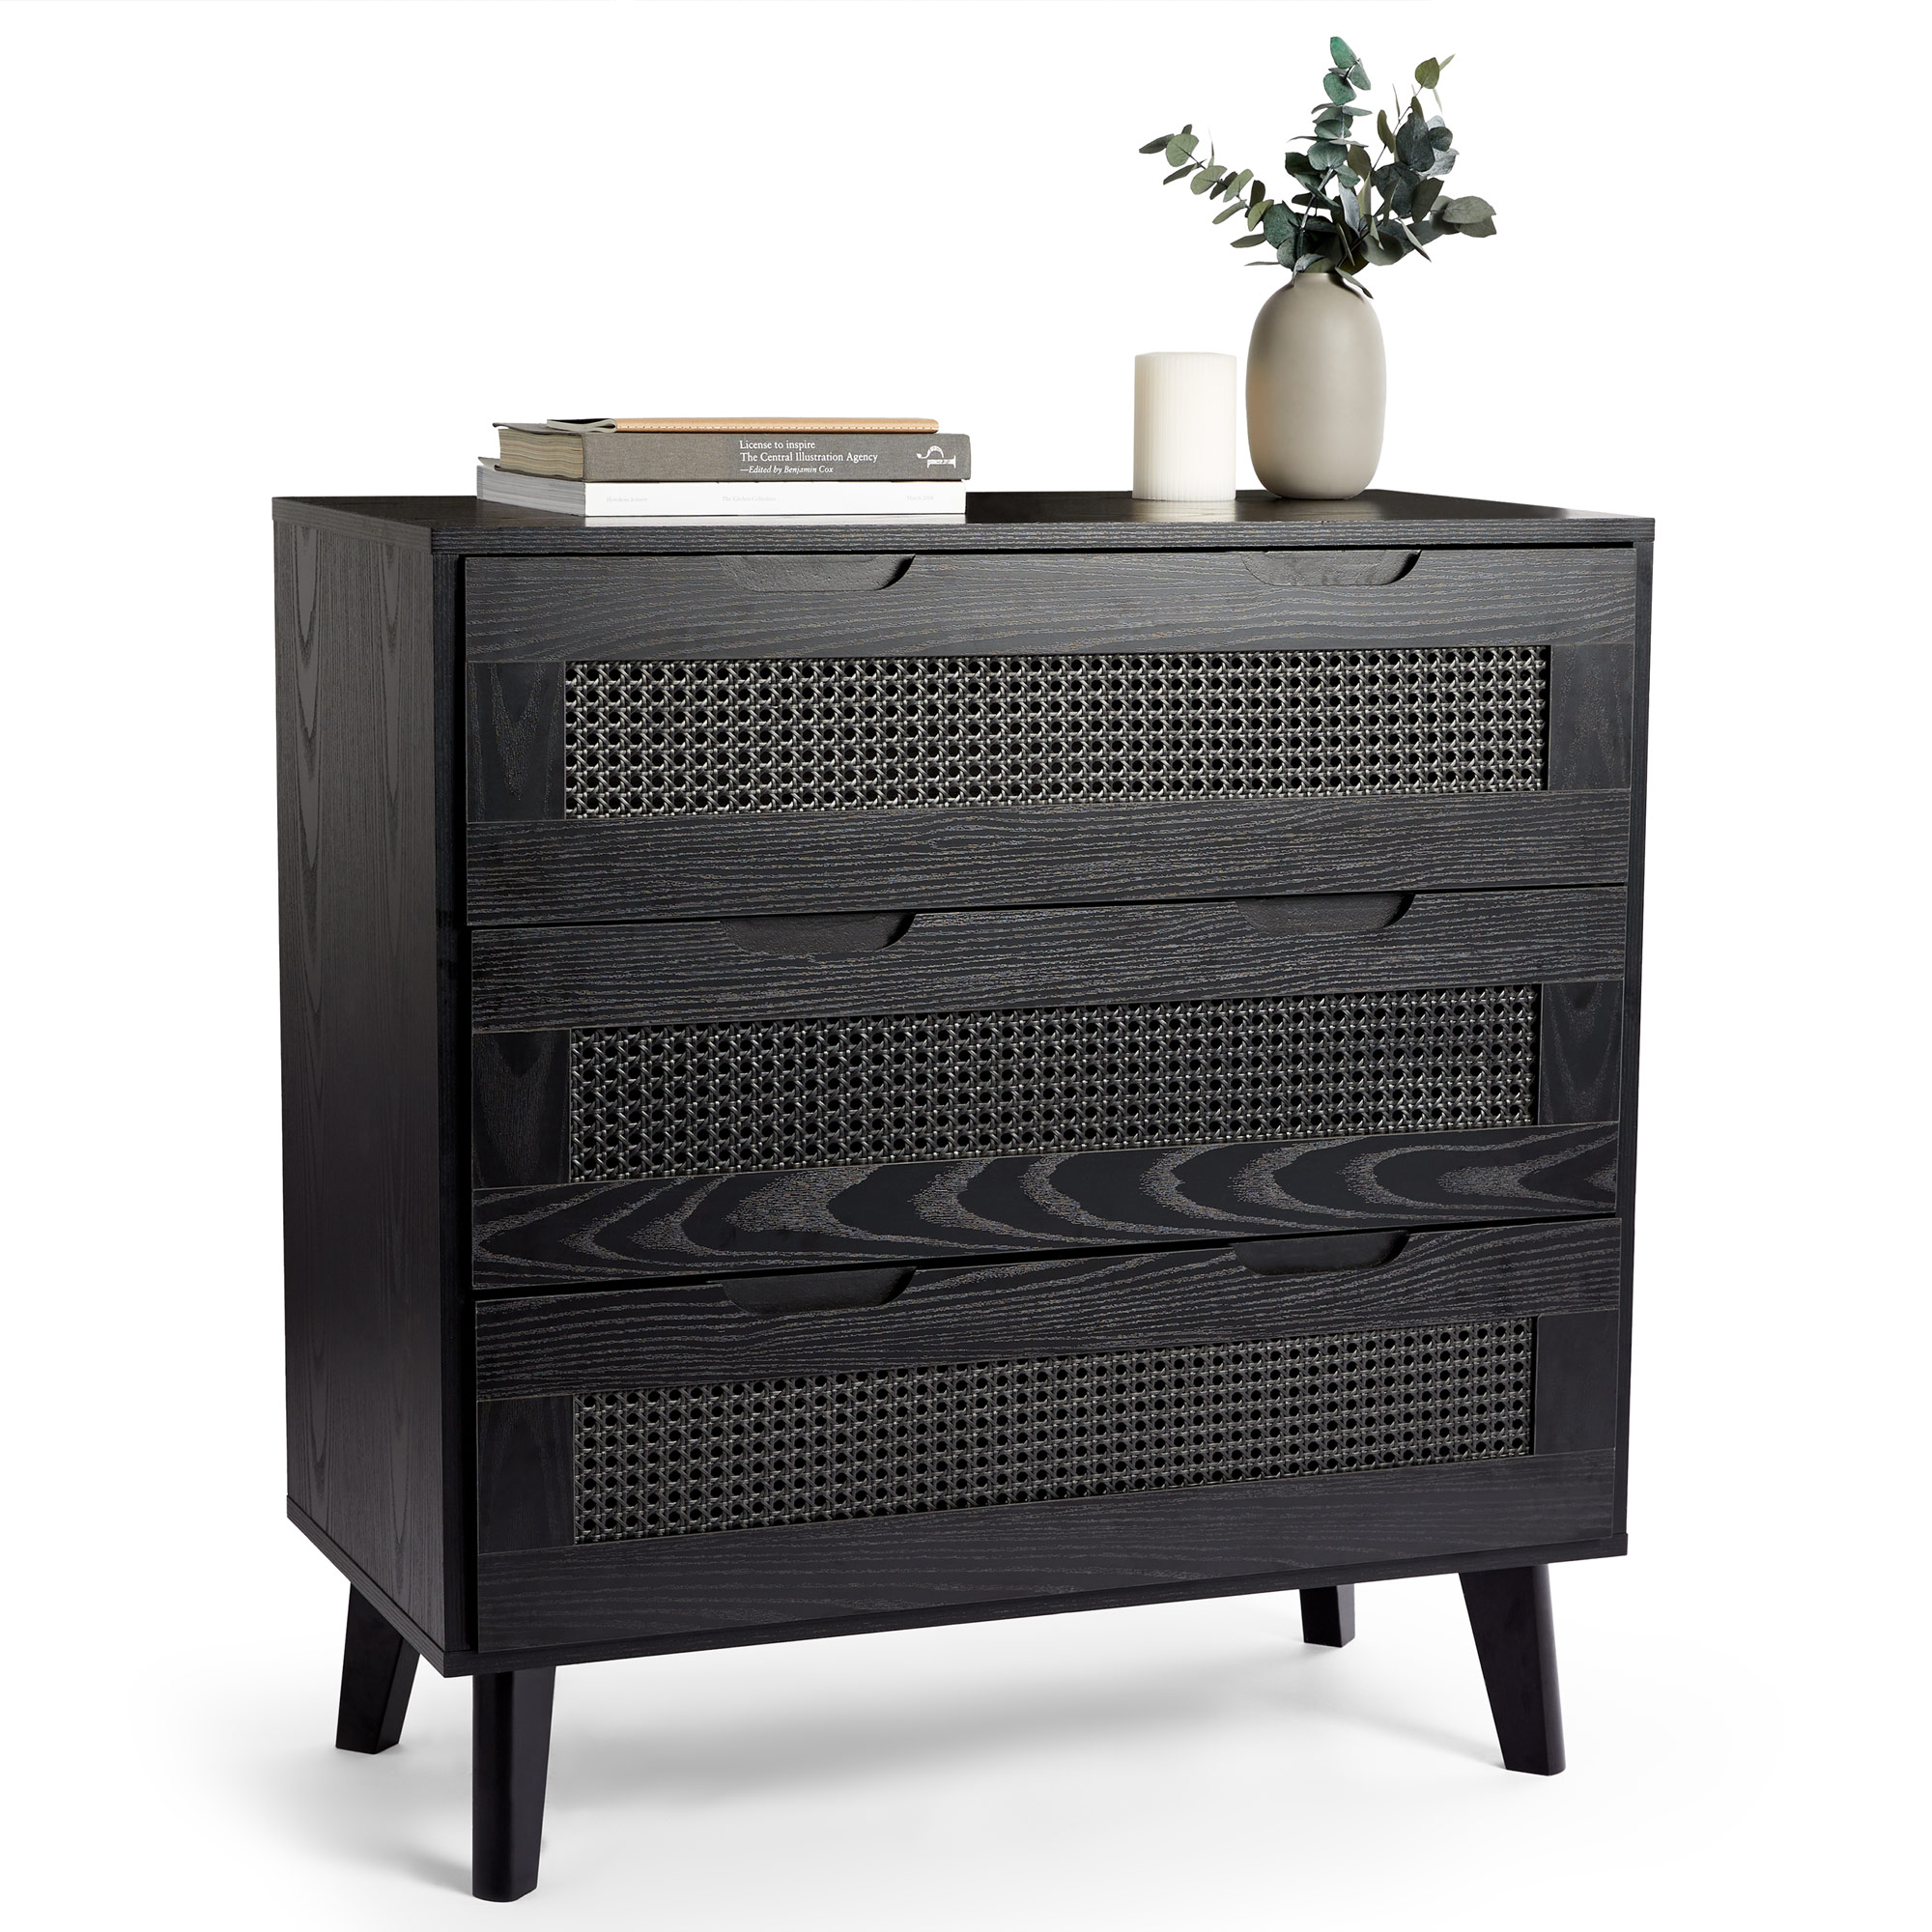 Chest of Drawers Black Rattan | 3 Drawer Dresser Clothes Cabinet | Spinningfield 